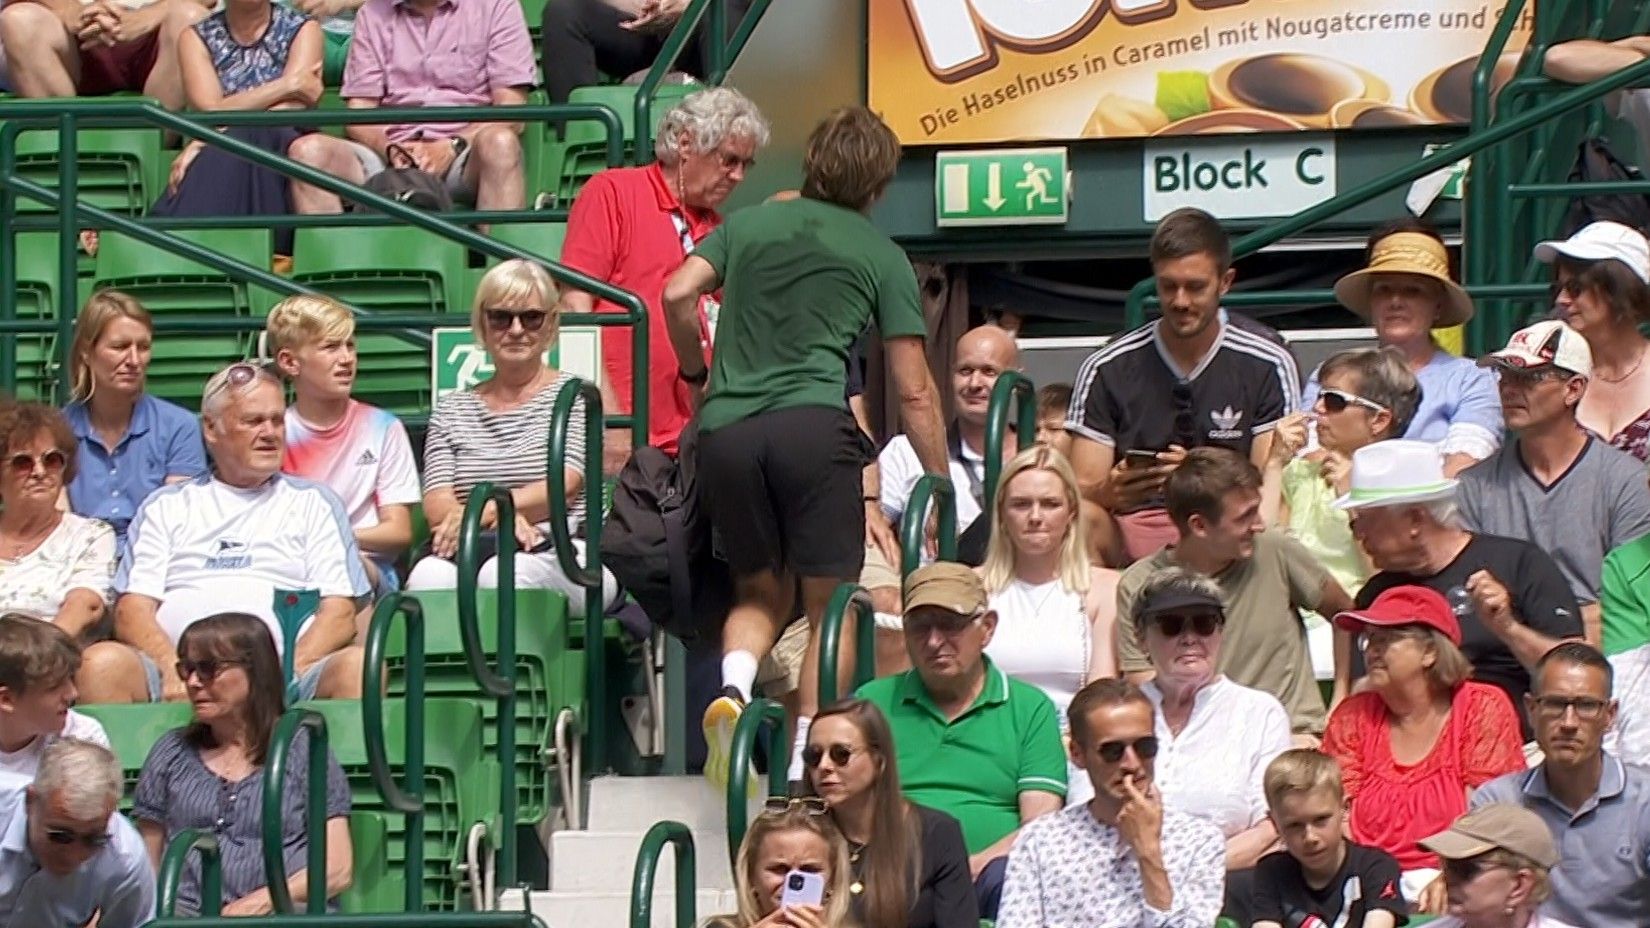 Daniil Medvedev shouts at coach, who storms out of stadium during Halle final